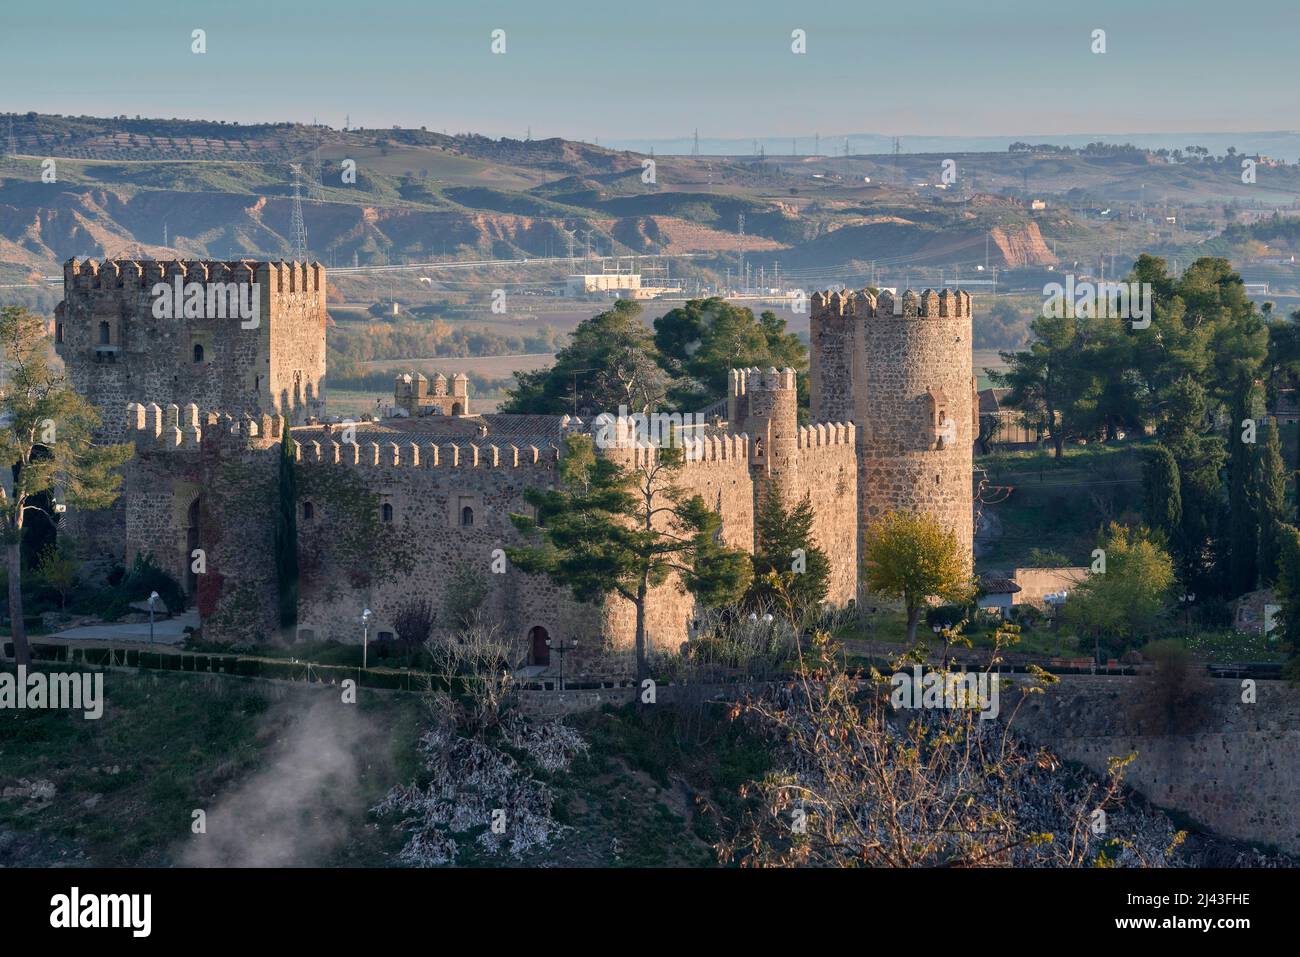 The castle of San Servando is located in the city of Toledo, Spain, next to  the banks of the Tagus River and the Spanish Infantry Academy Stock Photo -  Alamy